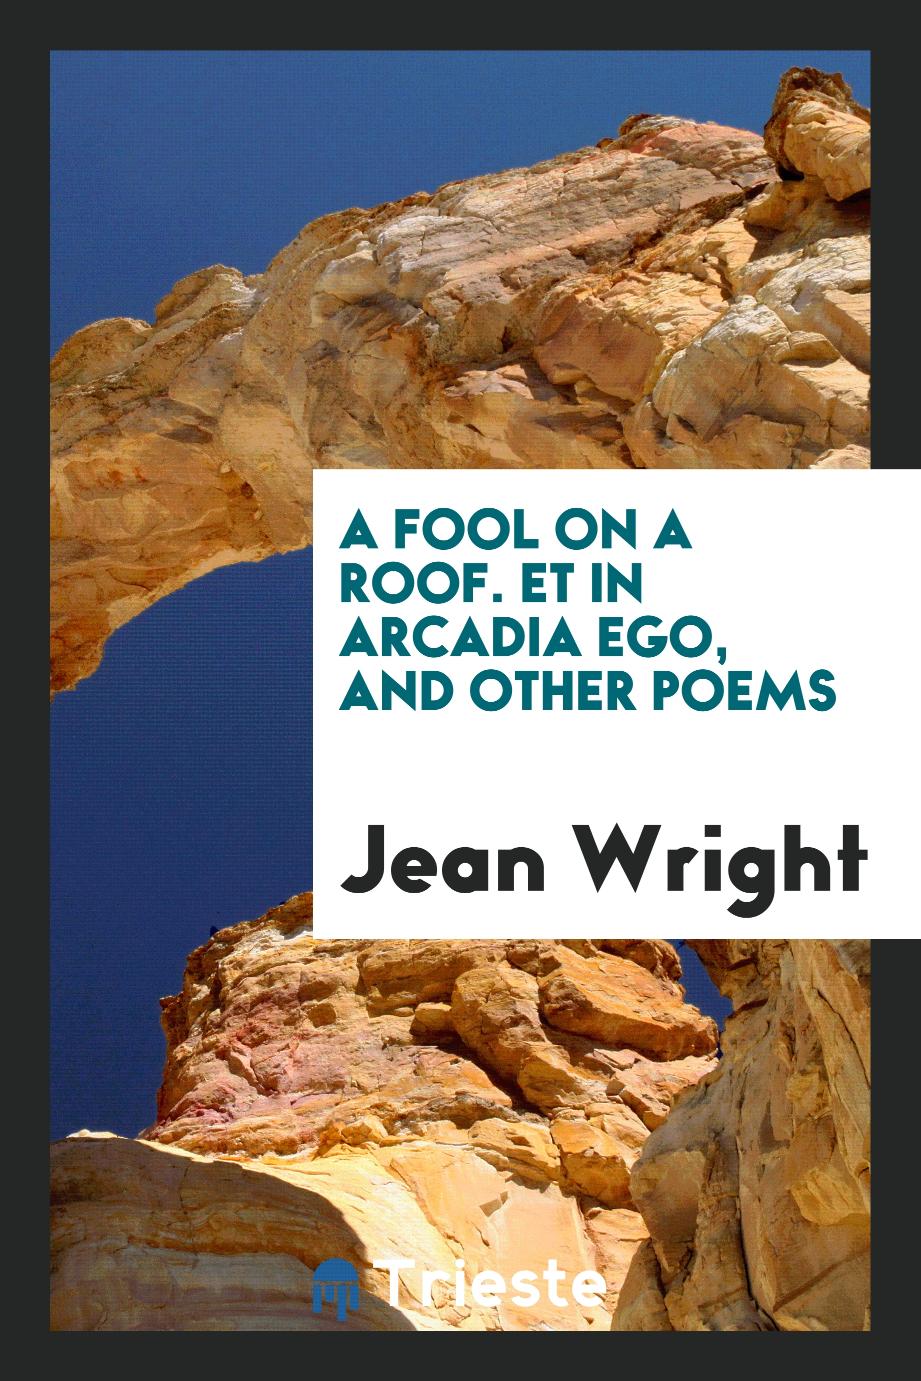 A fool on a roof. Et in arcadia ego, and other poems